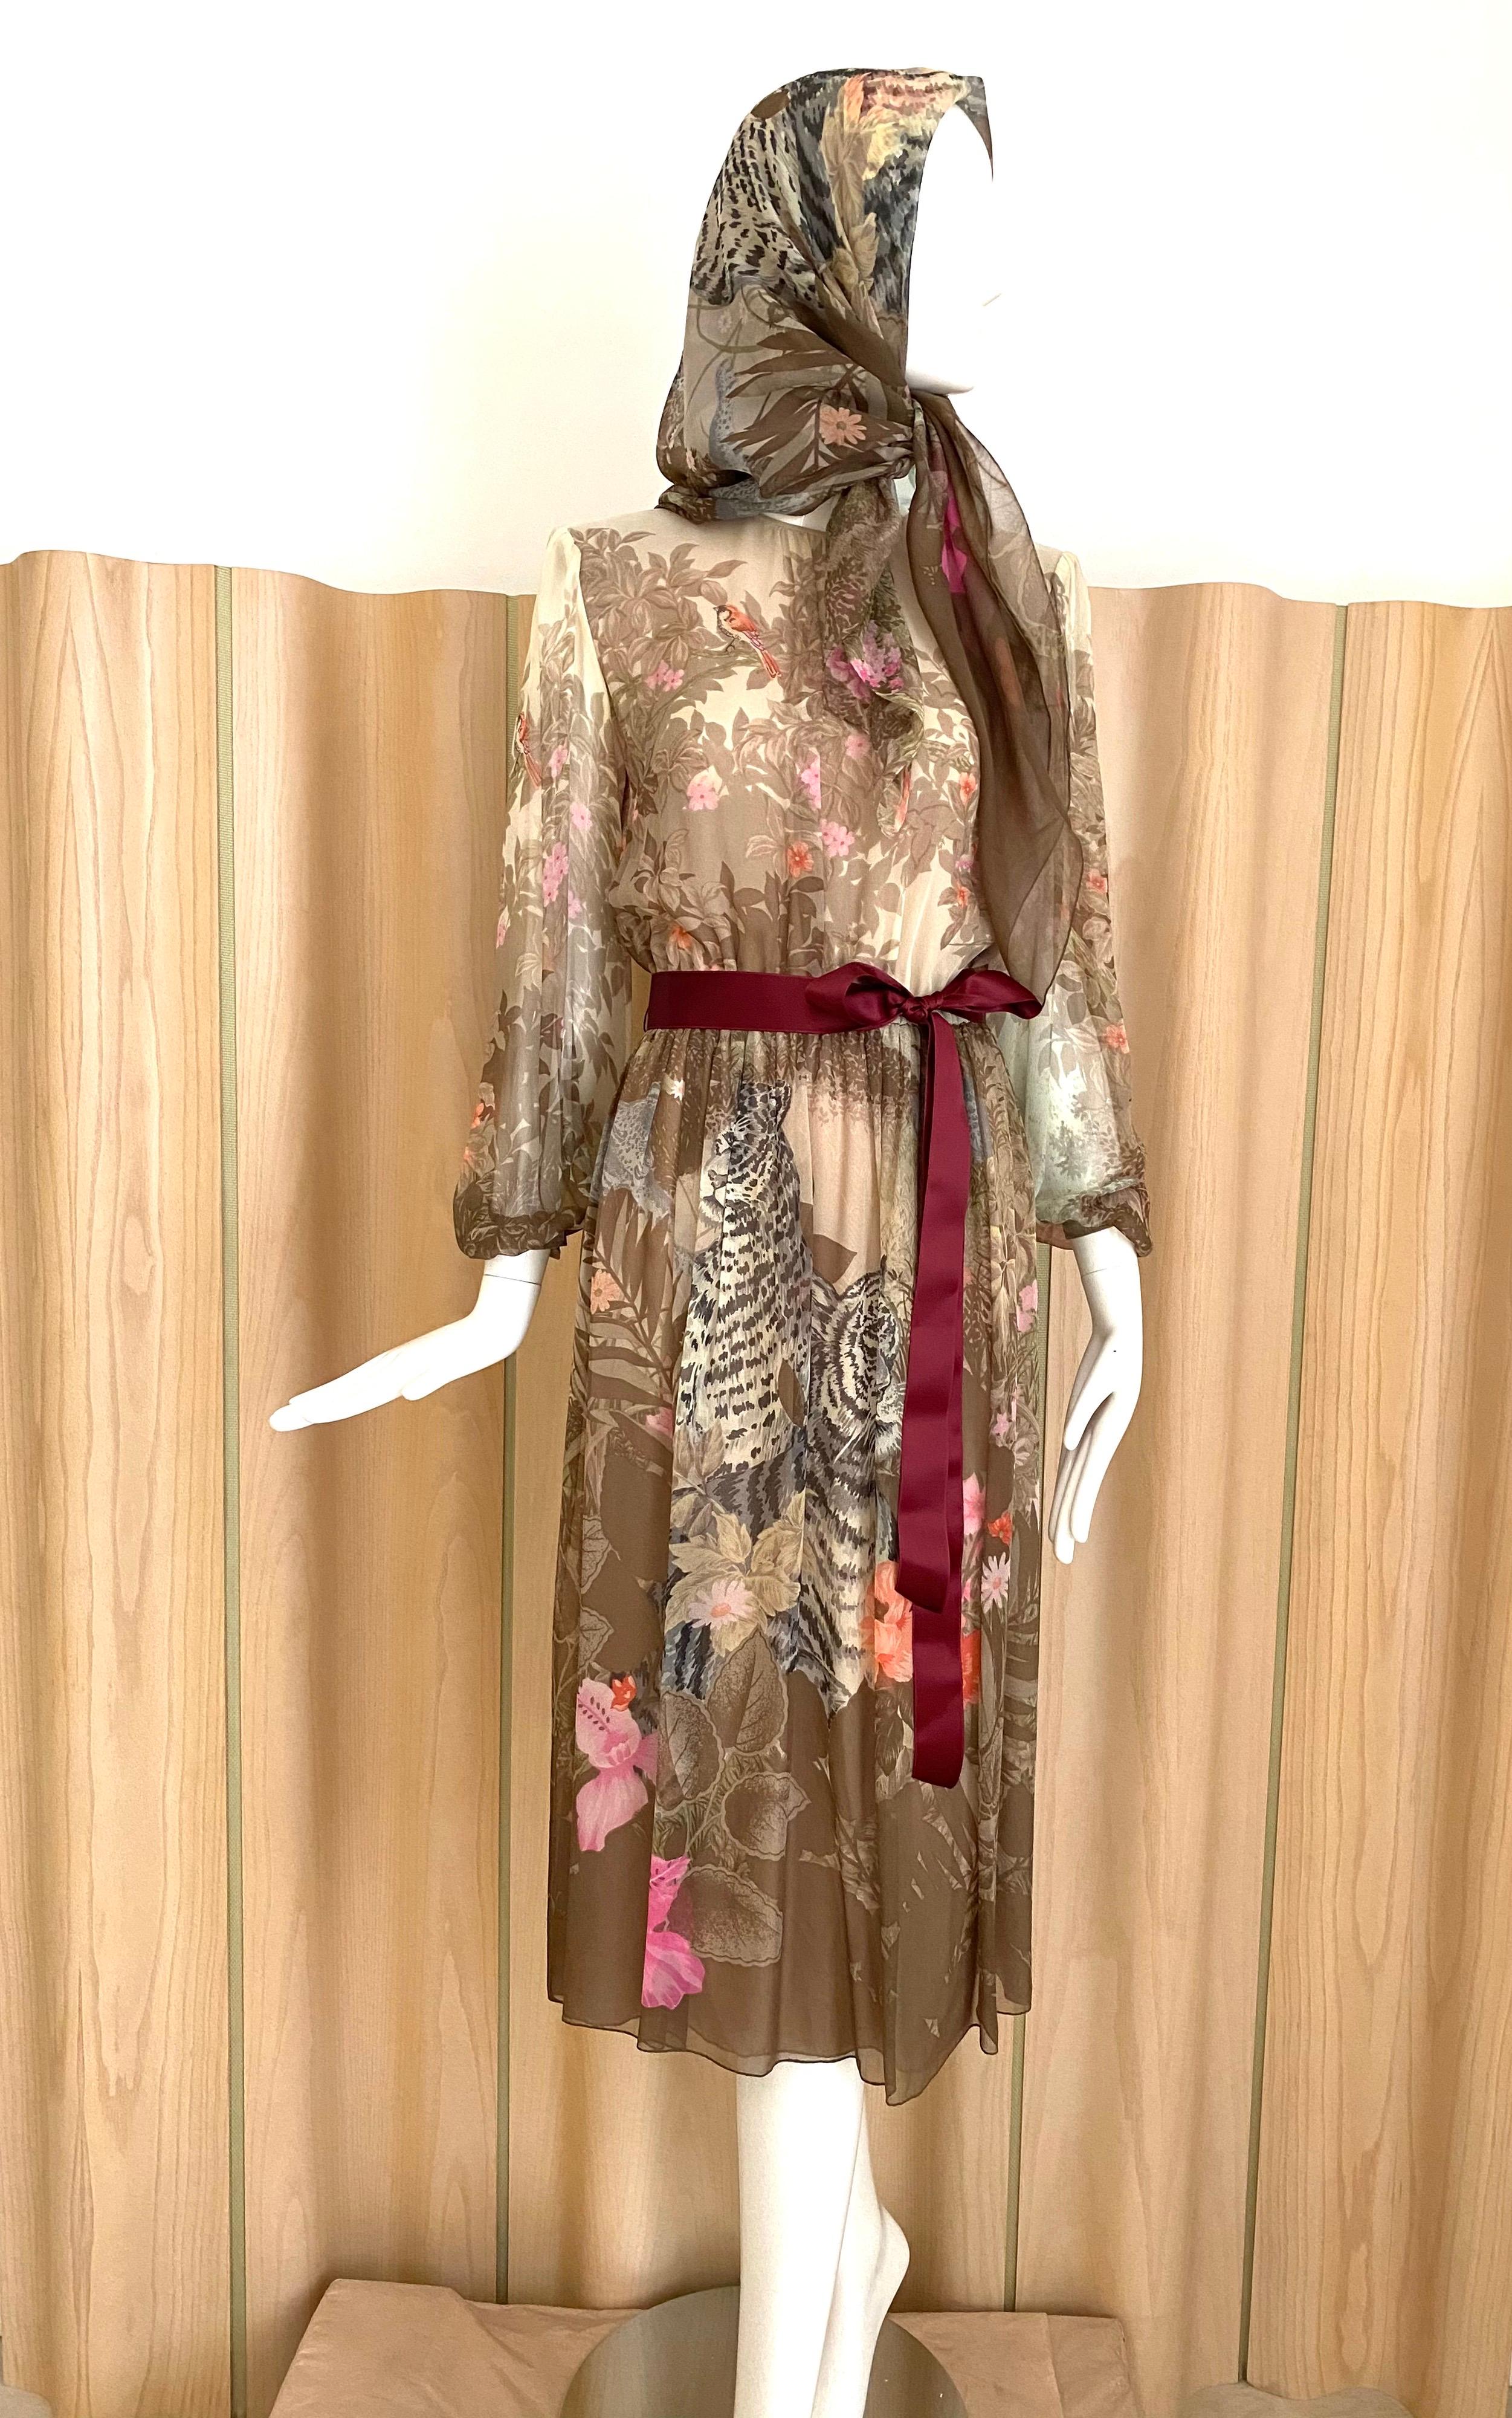 1970s Hanae Mori brown and pink tiger and floral print silk dress with Large silk scarf.
Size :  6
Bust: 36” / waist stretch up to 30” / Hip:  42” 